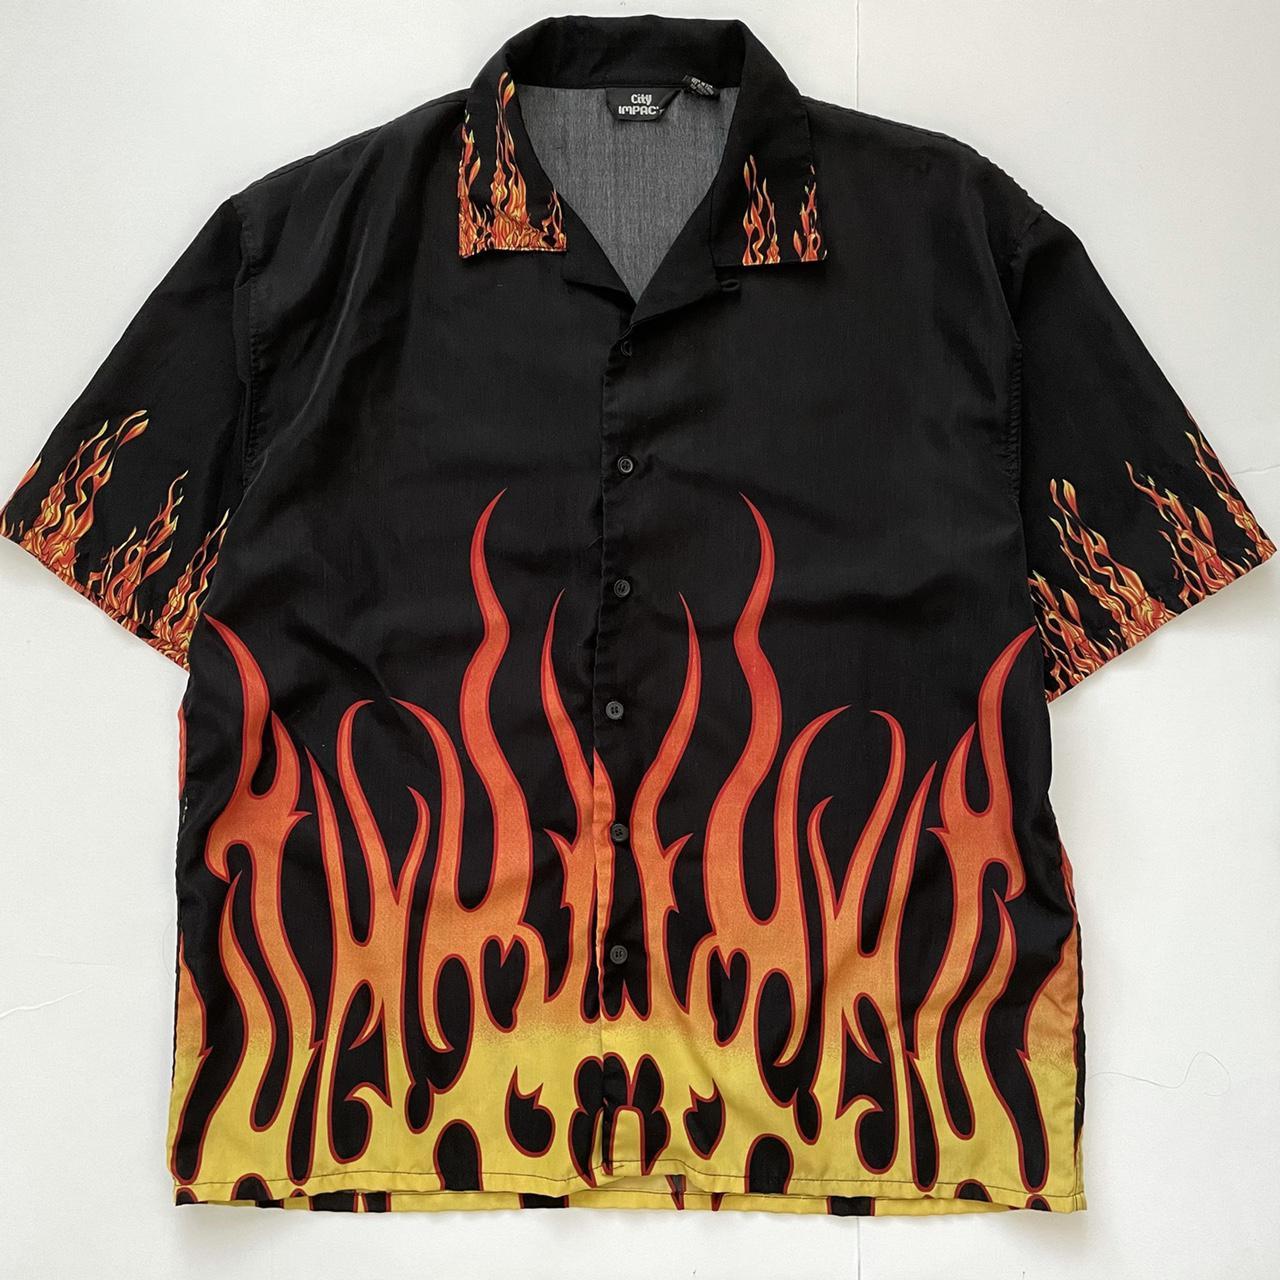 Product Image 2 - Vintage 1990s Guy Fieri Flame